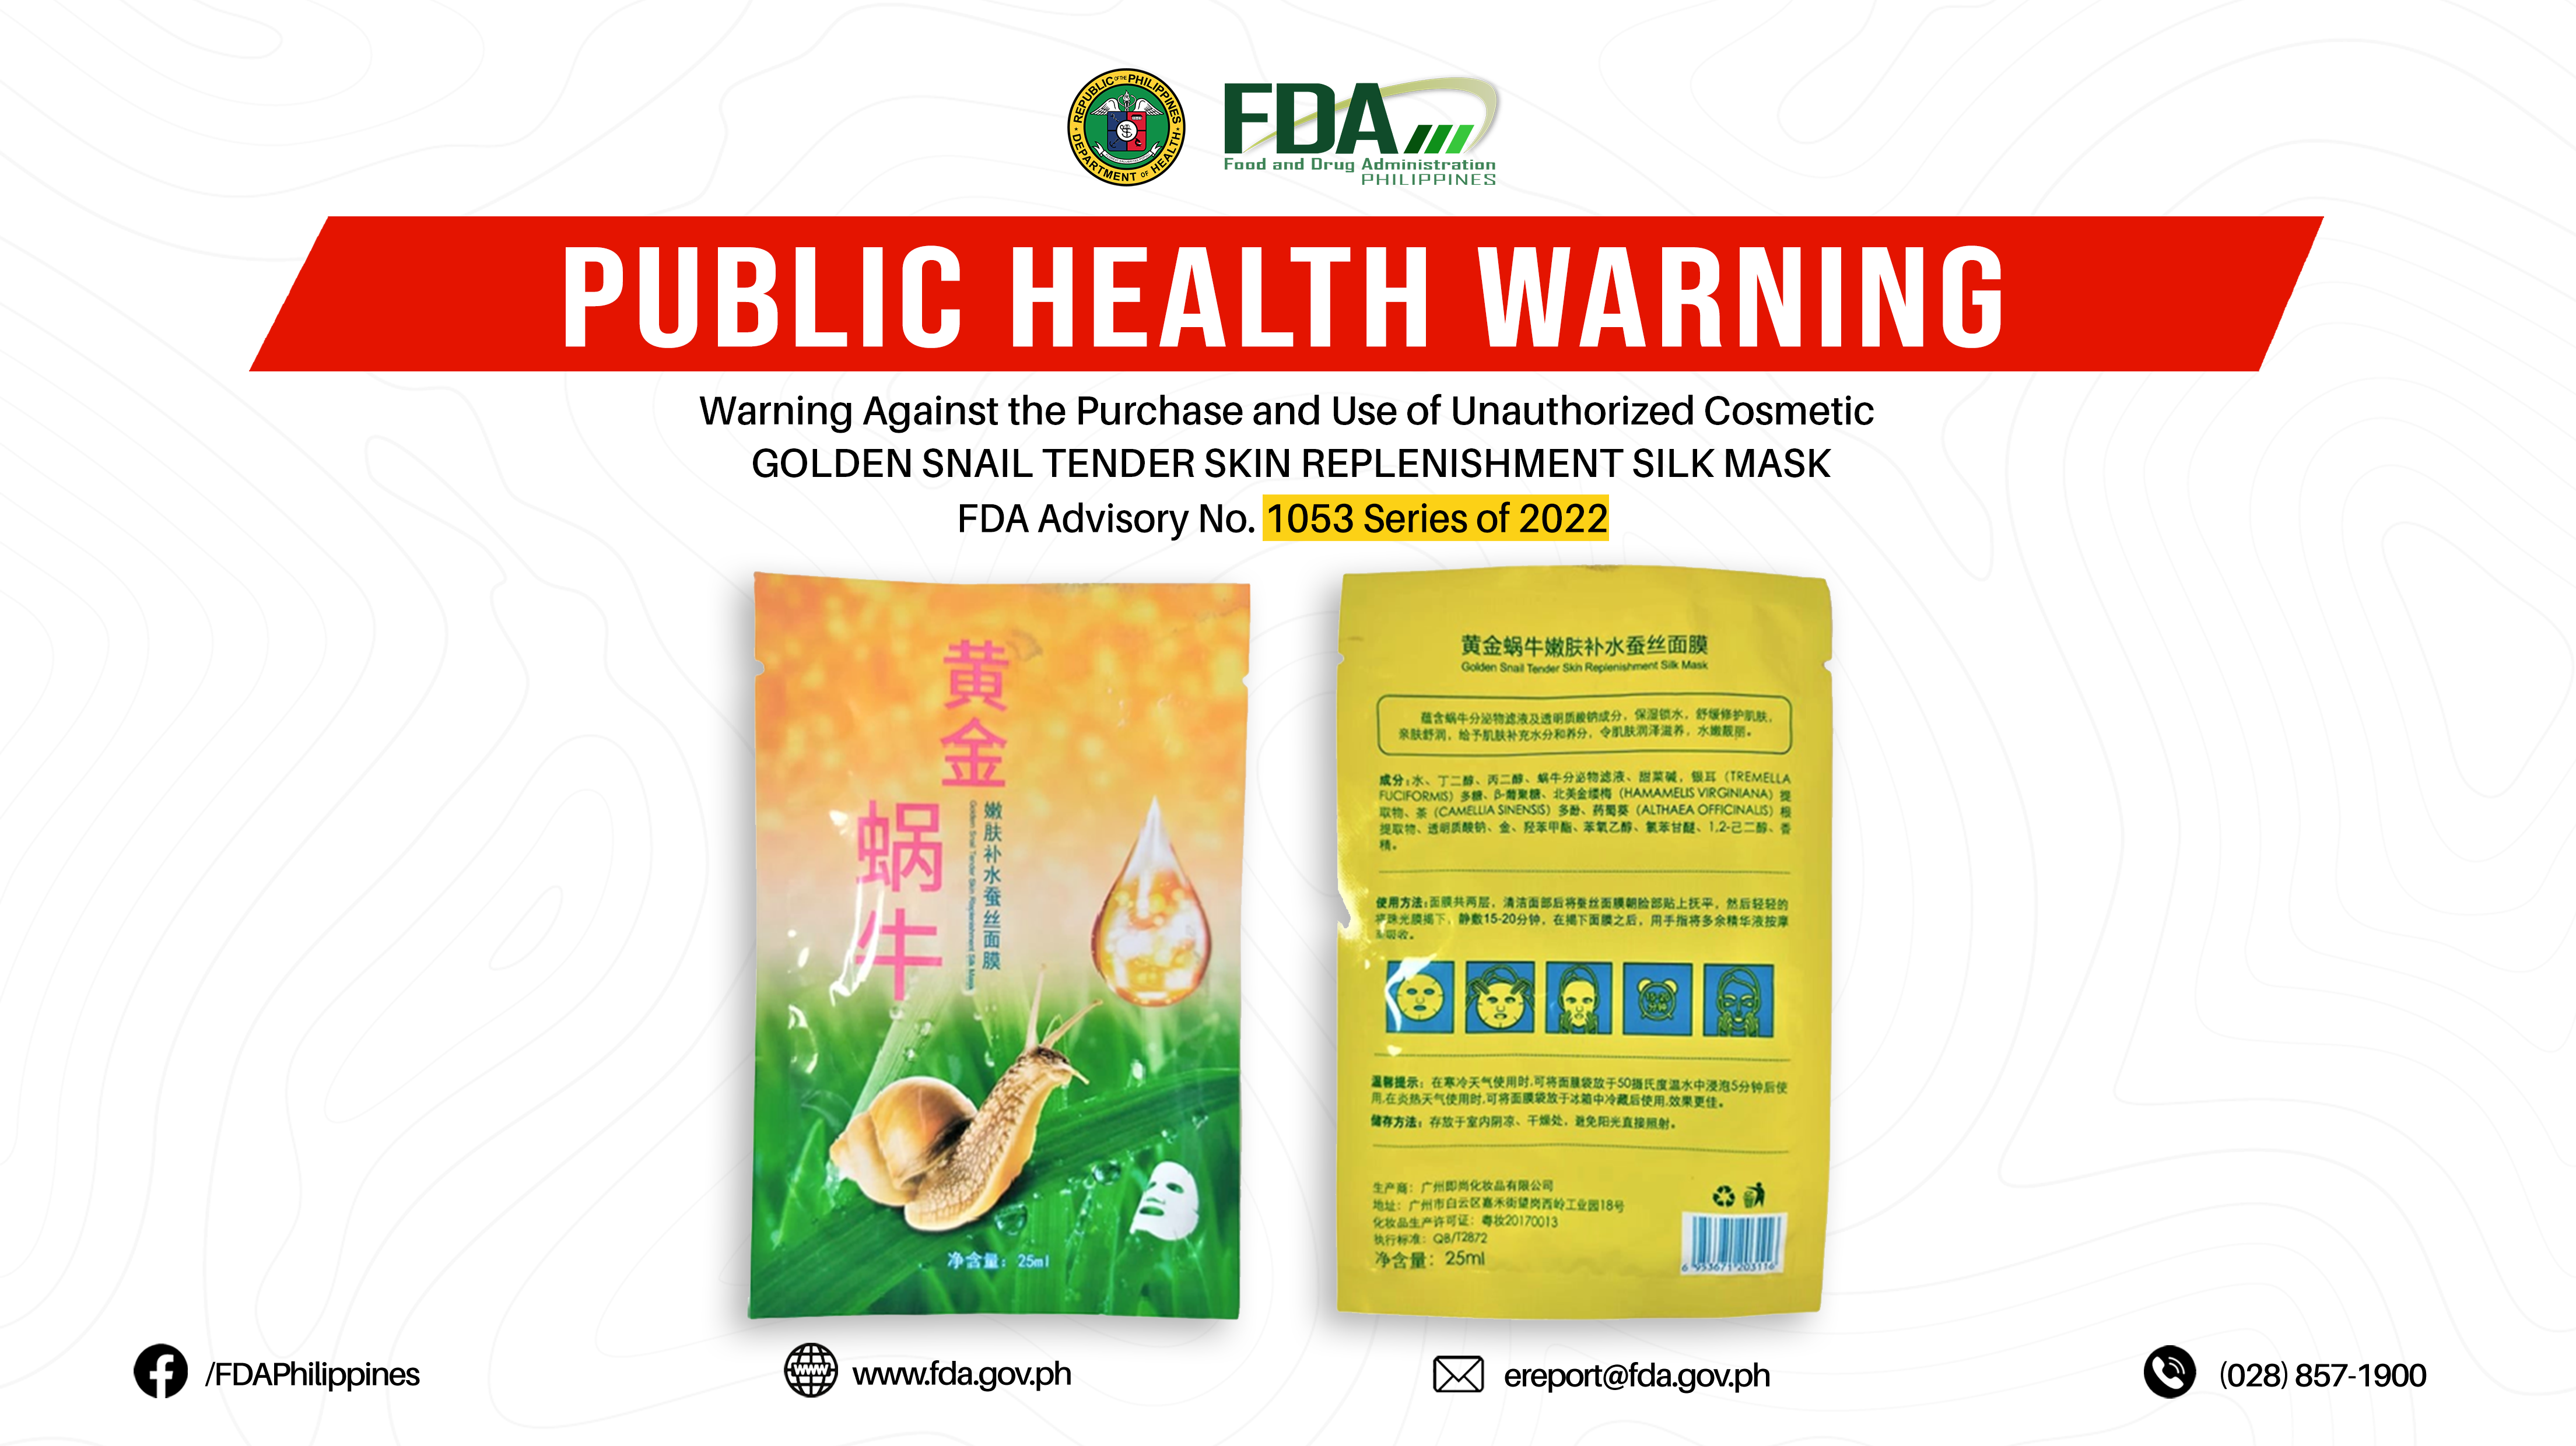 FDA Advisory No.2022-1053 || Public Health Warning Against the Purchase and Use of Unauthorized Cosmetic GOLDEN SNAIL TENDER SKIN REPLENISHMENT SILK MASK